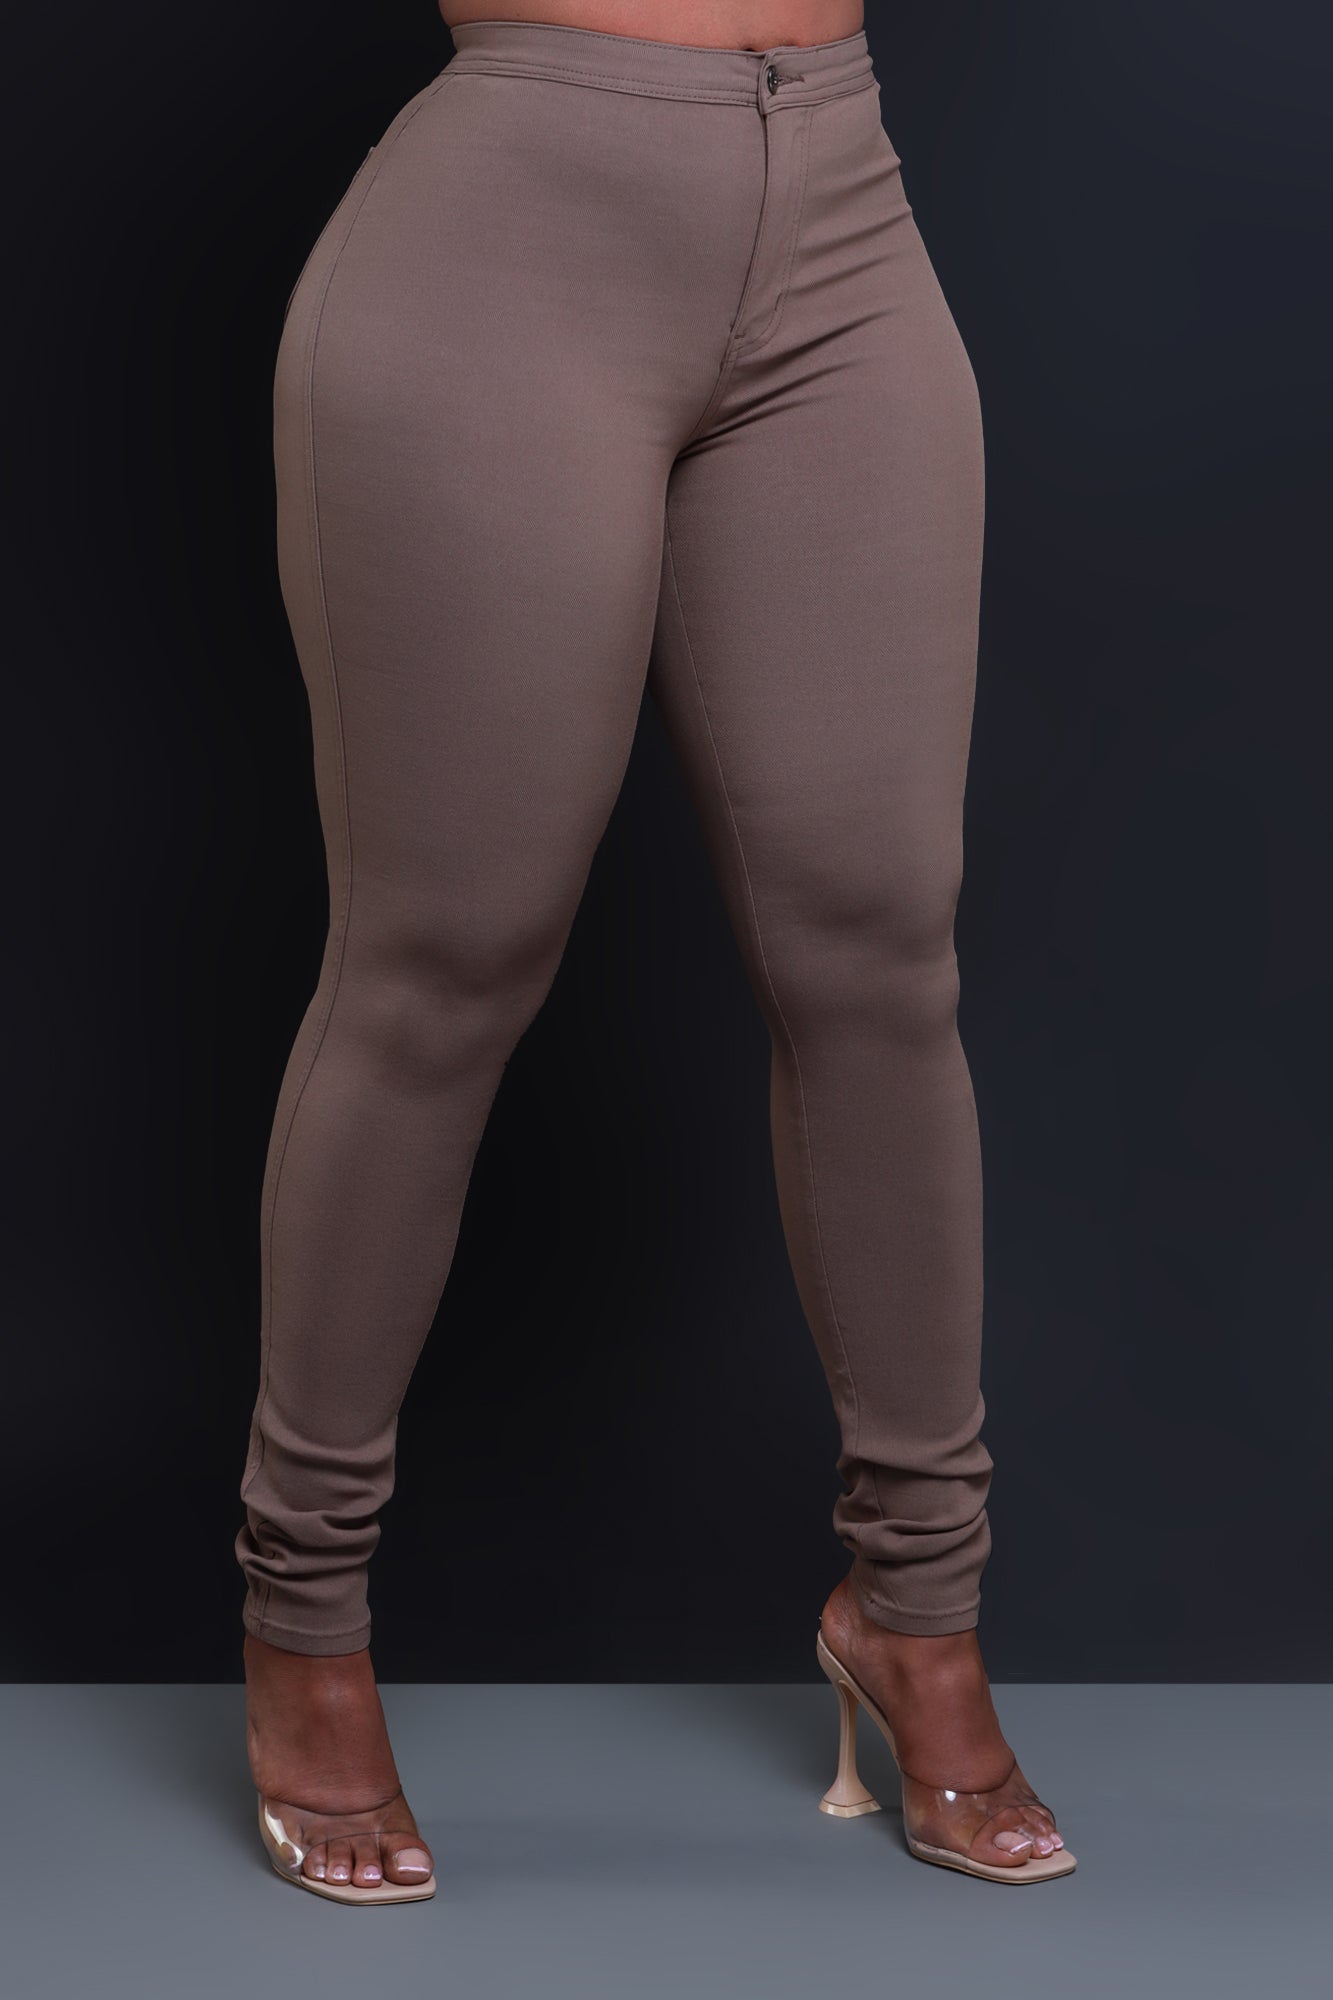 Super Swank High Waist Stretchy Jeans - Taupe - Swank A Posh